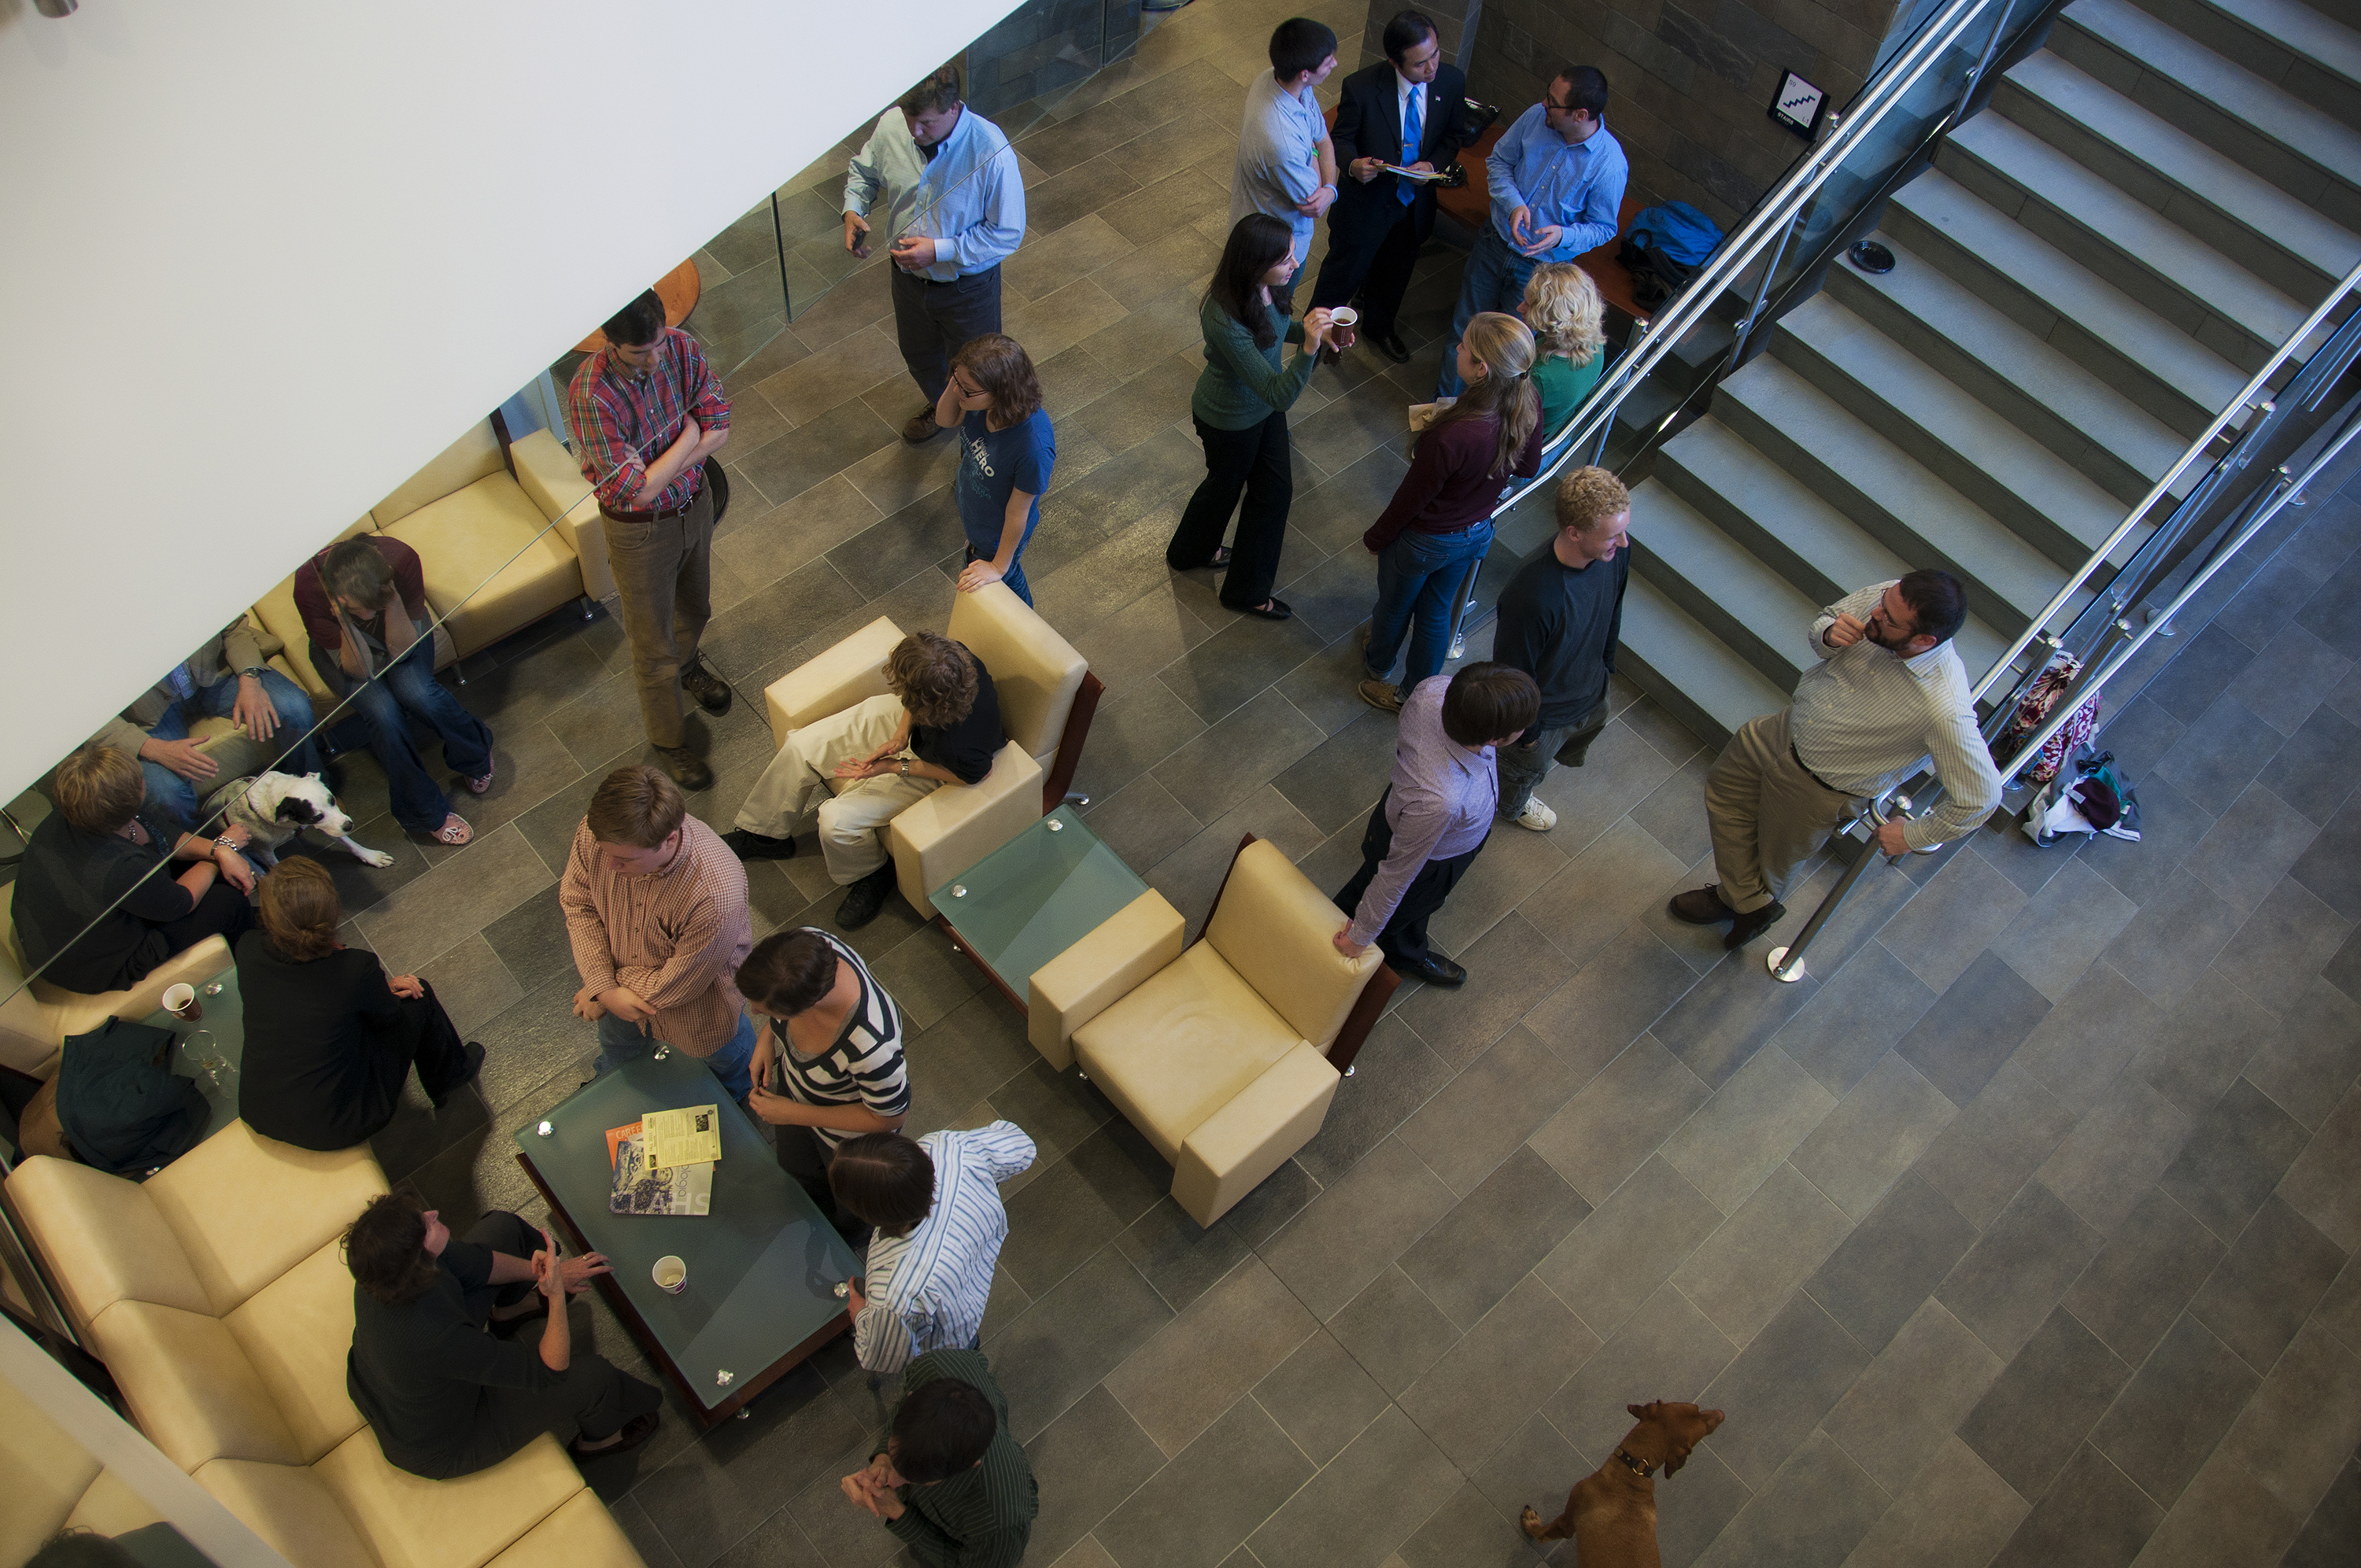 View looking down on a large group of students, faculty, and staff interacting in an open atrium area.